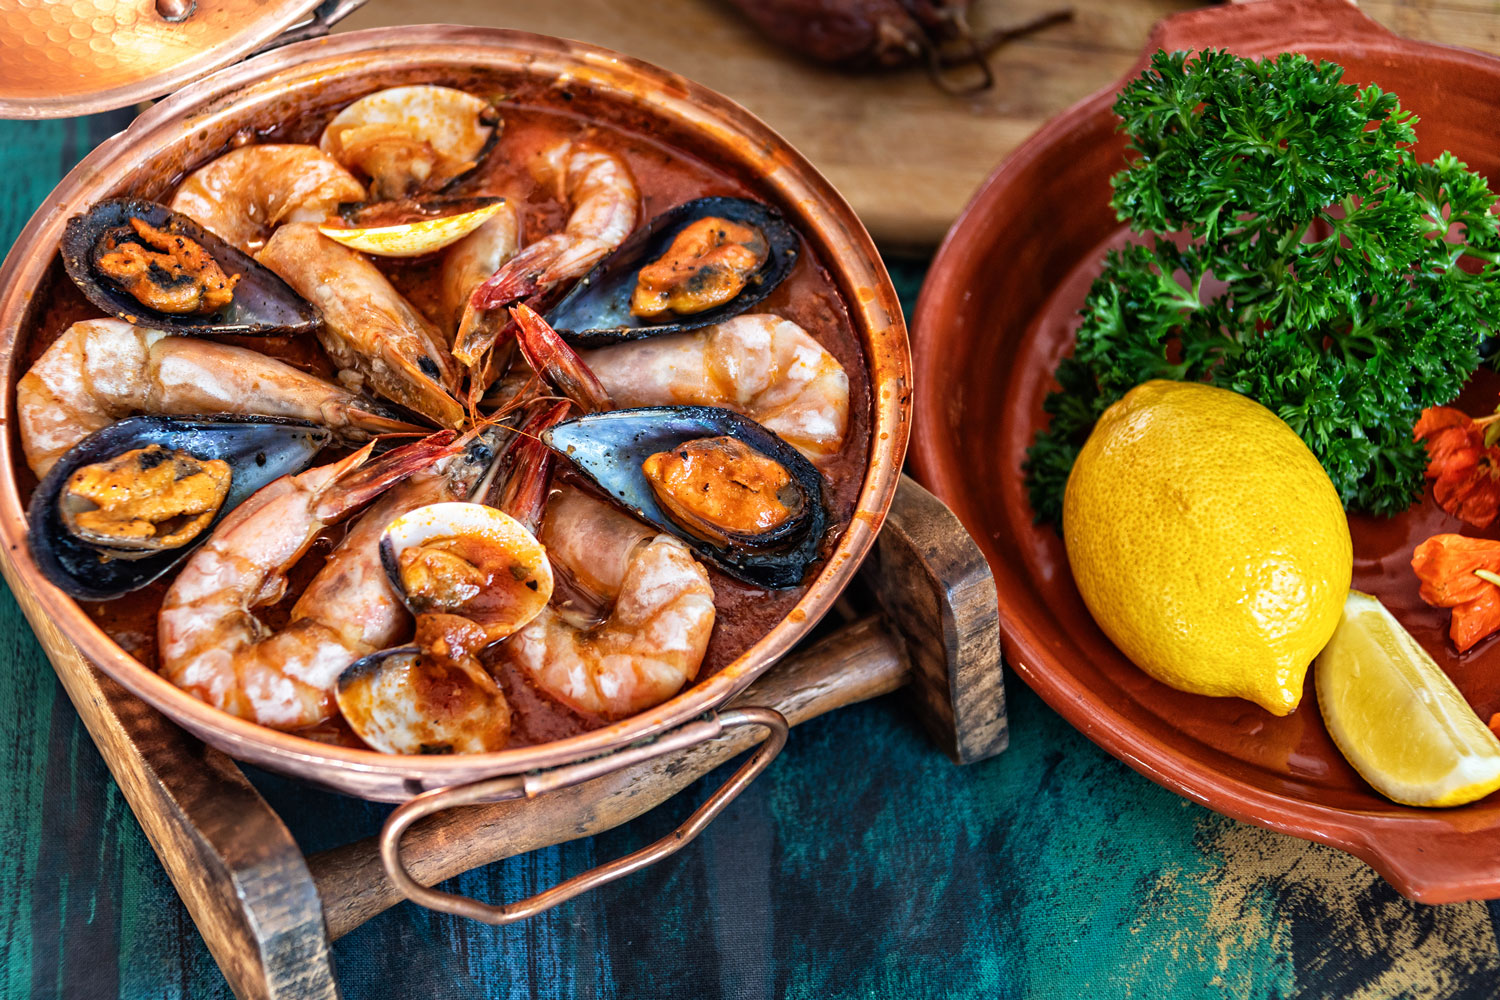 Enjoy an authentic local dinner cooked in a traditional Cataplana and served with Portuguese wines, Algarve, Portugal.